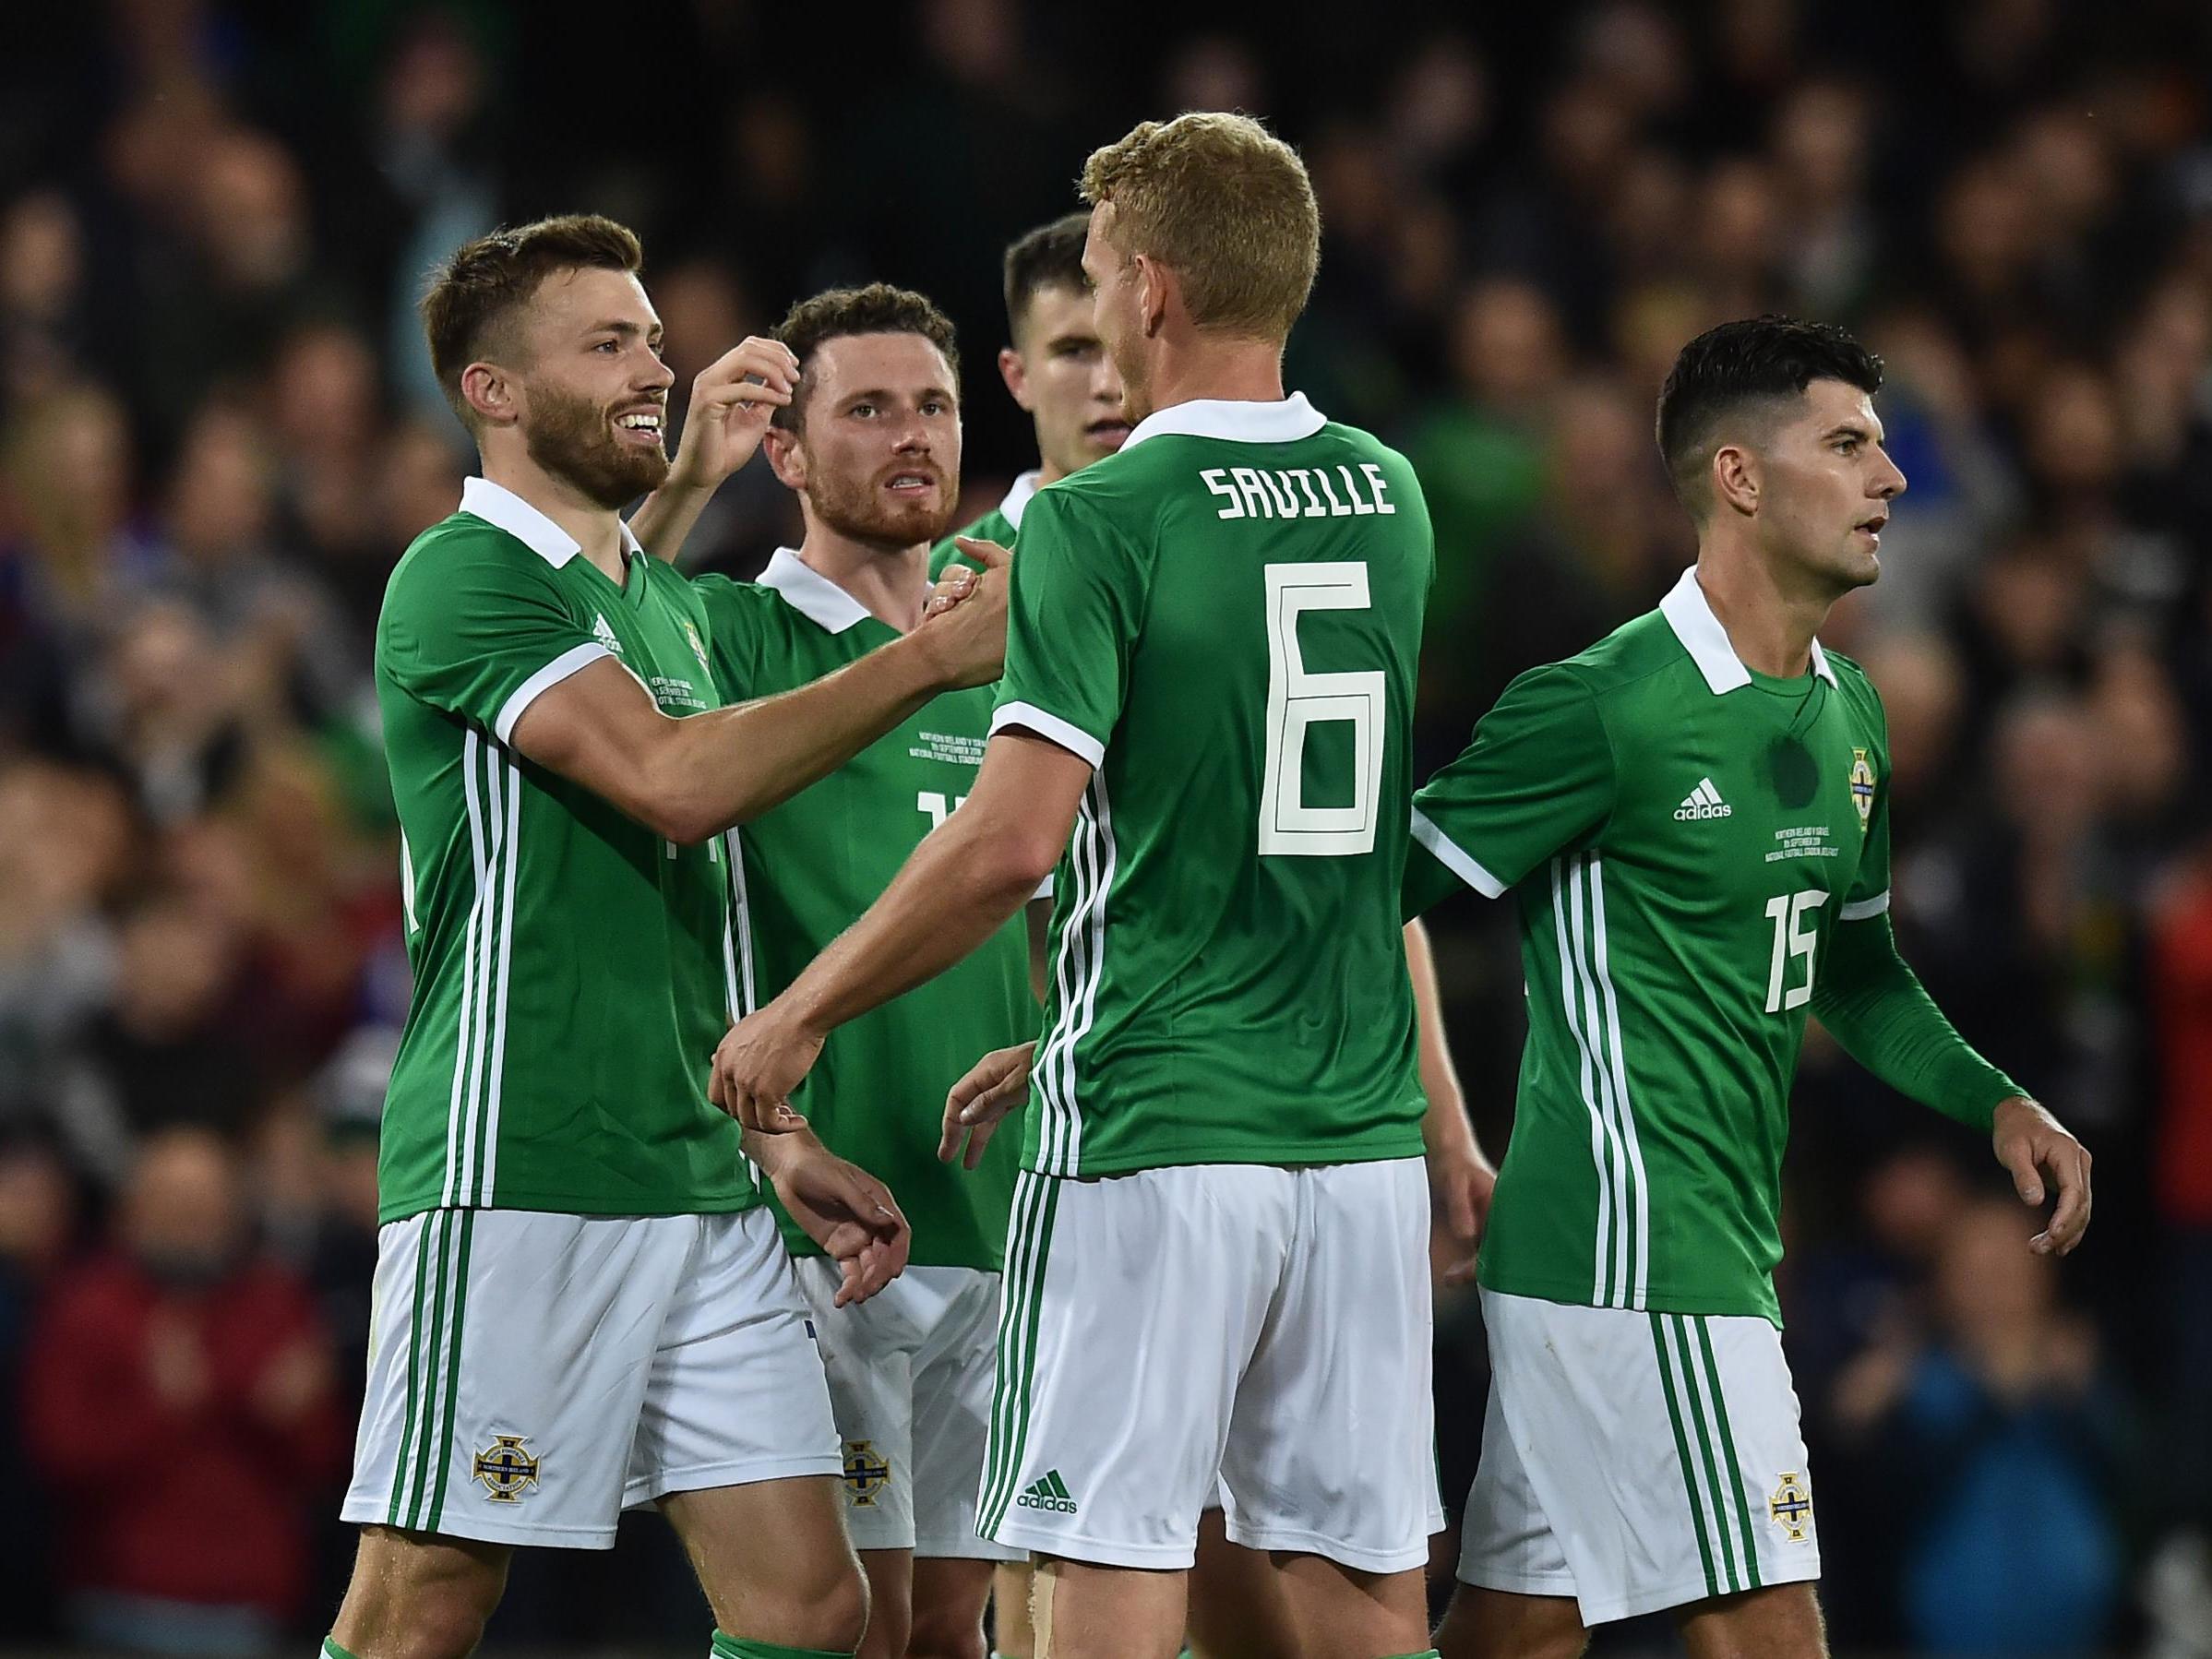 Northern Ireland made their opportunities count against Israel